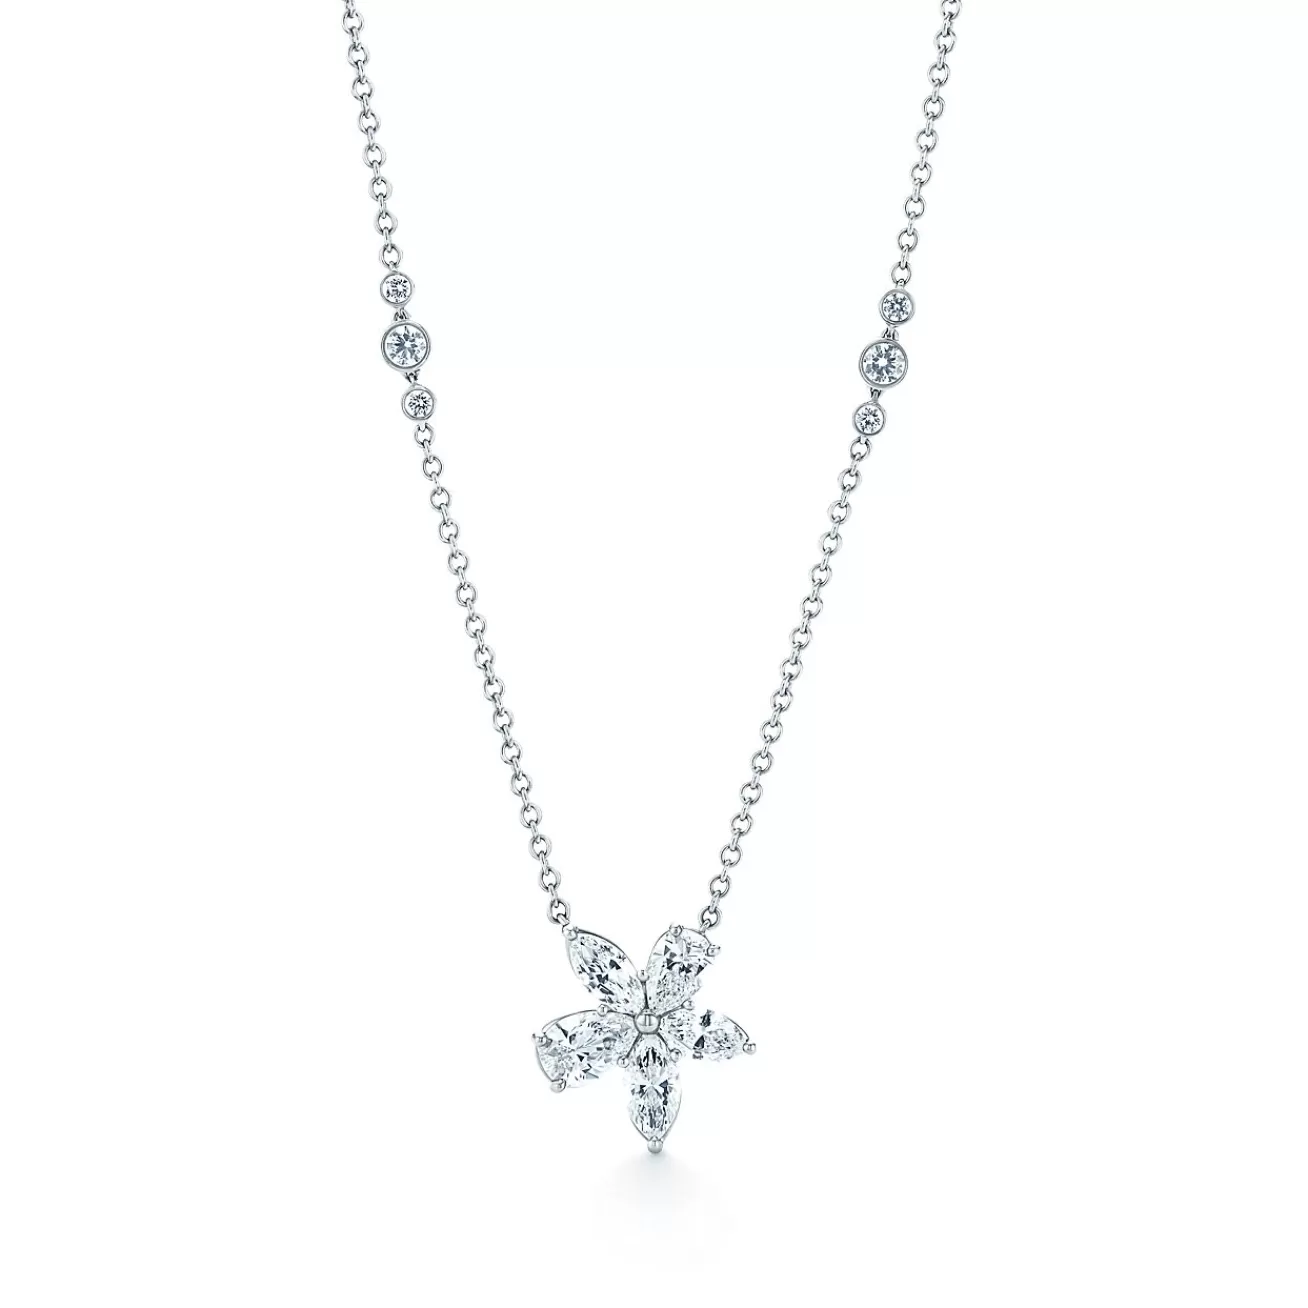 Tiffany & Co. Tiffany Victoria® mixed cluster pendant in platinum with diamonds, extra large. | ^ Necklaces & Pendants | Platinum Jewelry